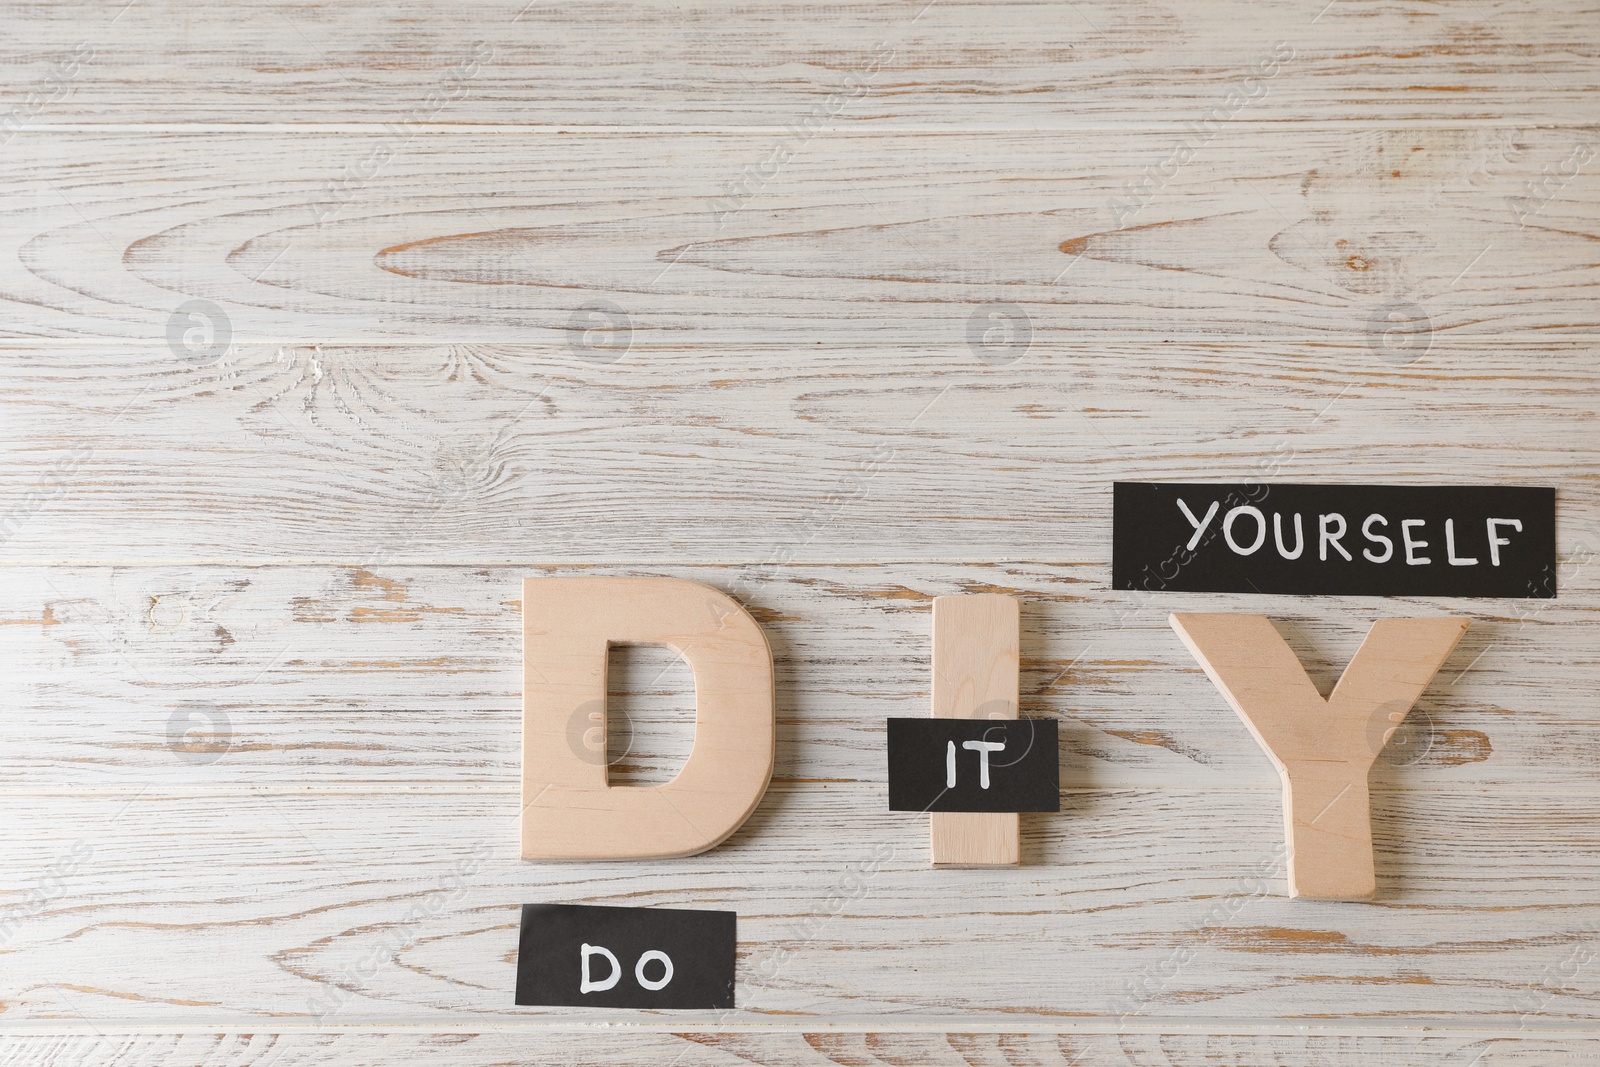 Photo of Phrase Do It Yourself and abbreviation DIY made of letters on white wooden table, flat lay. Space for text